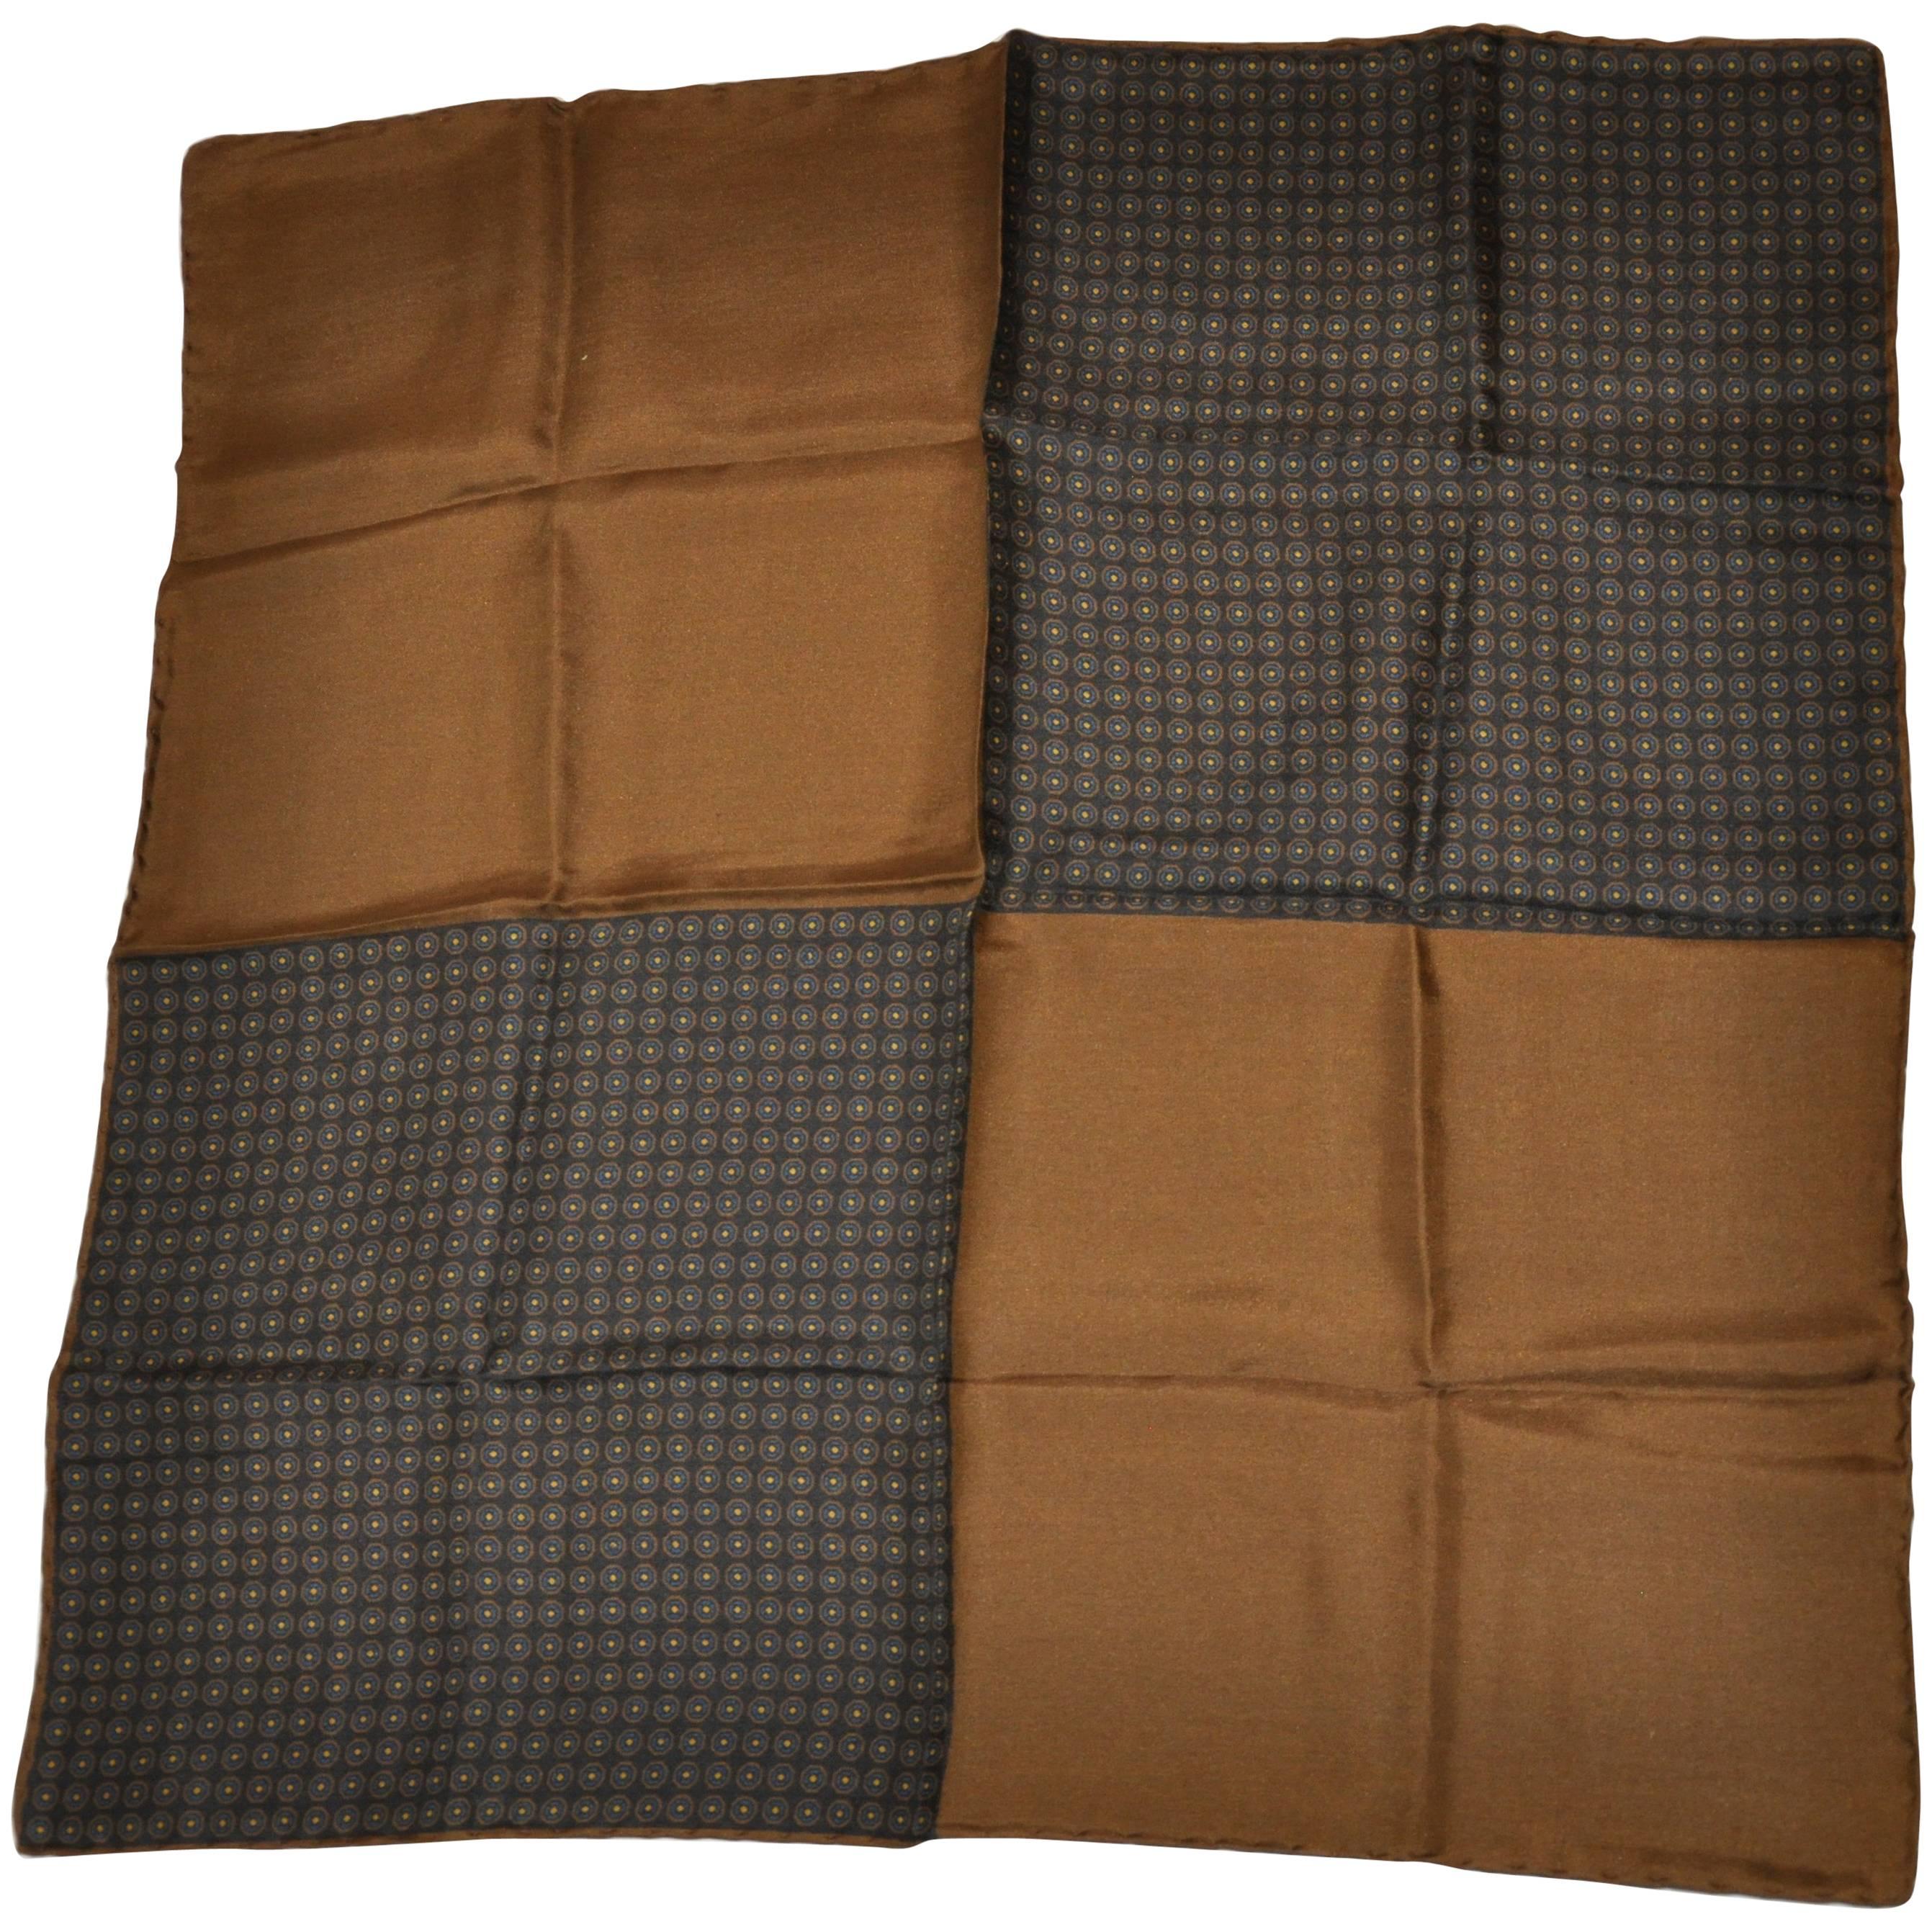 Warm Browns and Multi-Pattern Four Blocks silk handkerchief For Sale